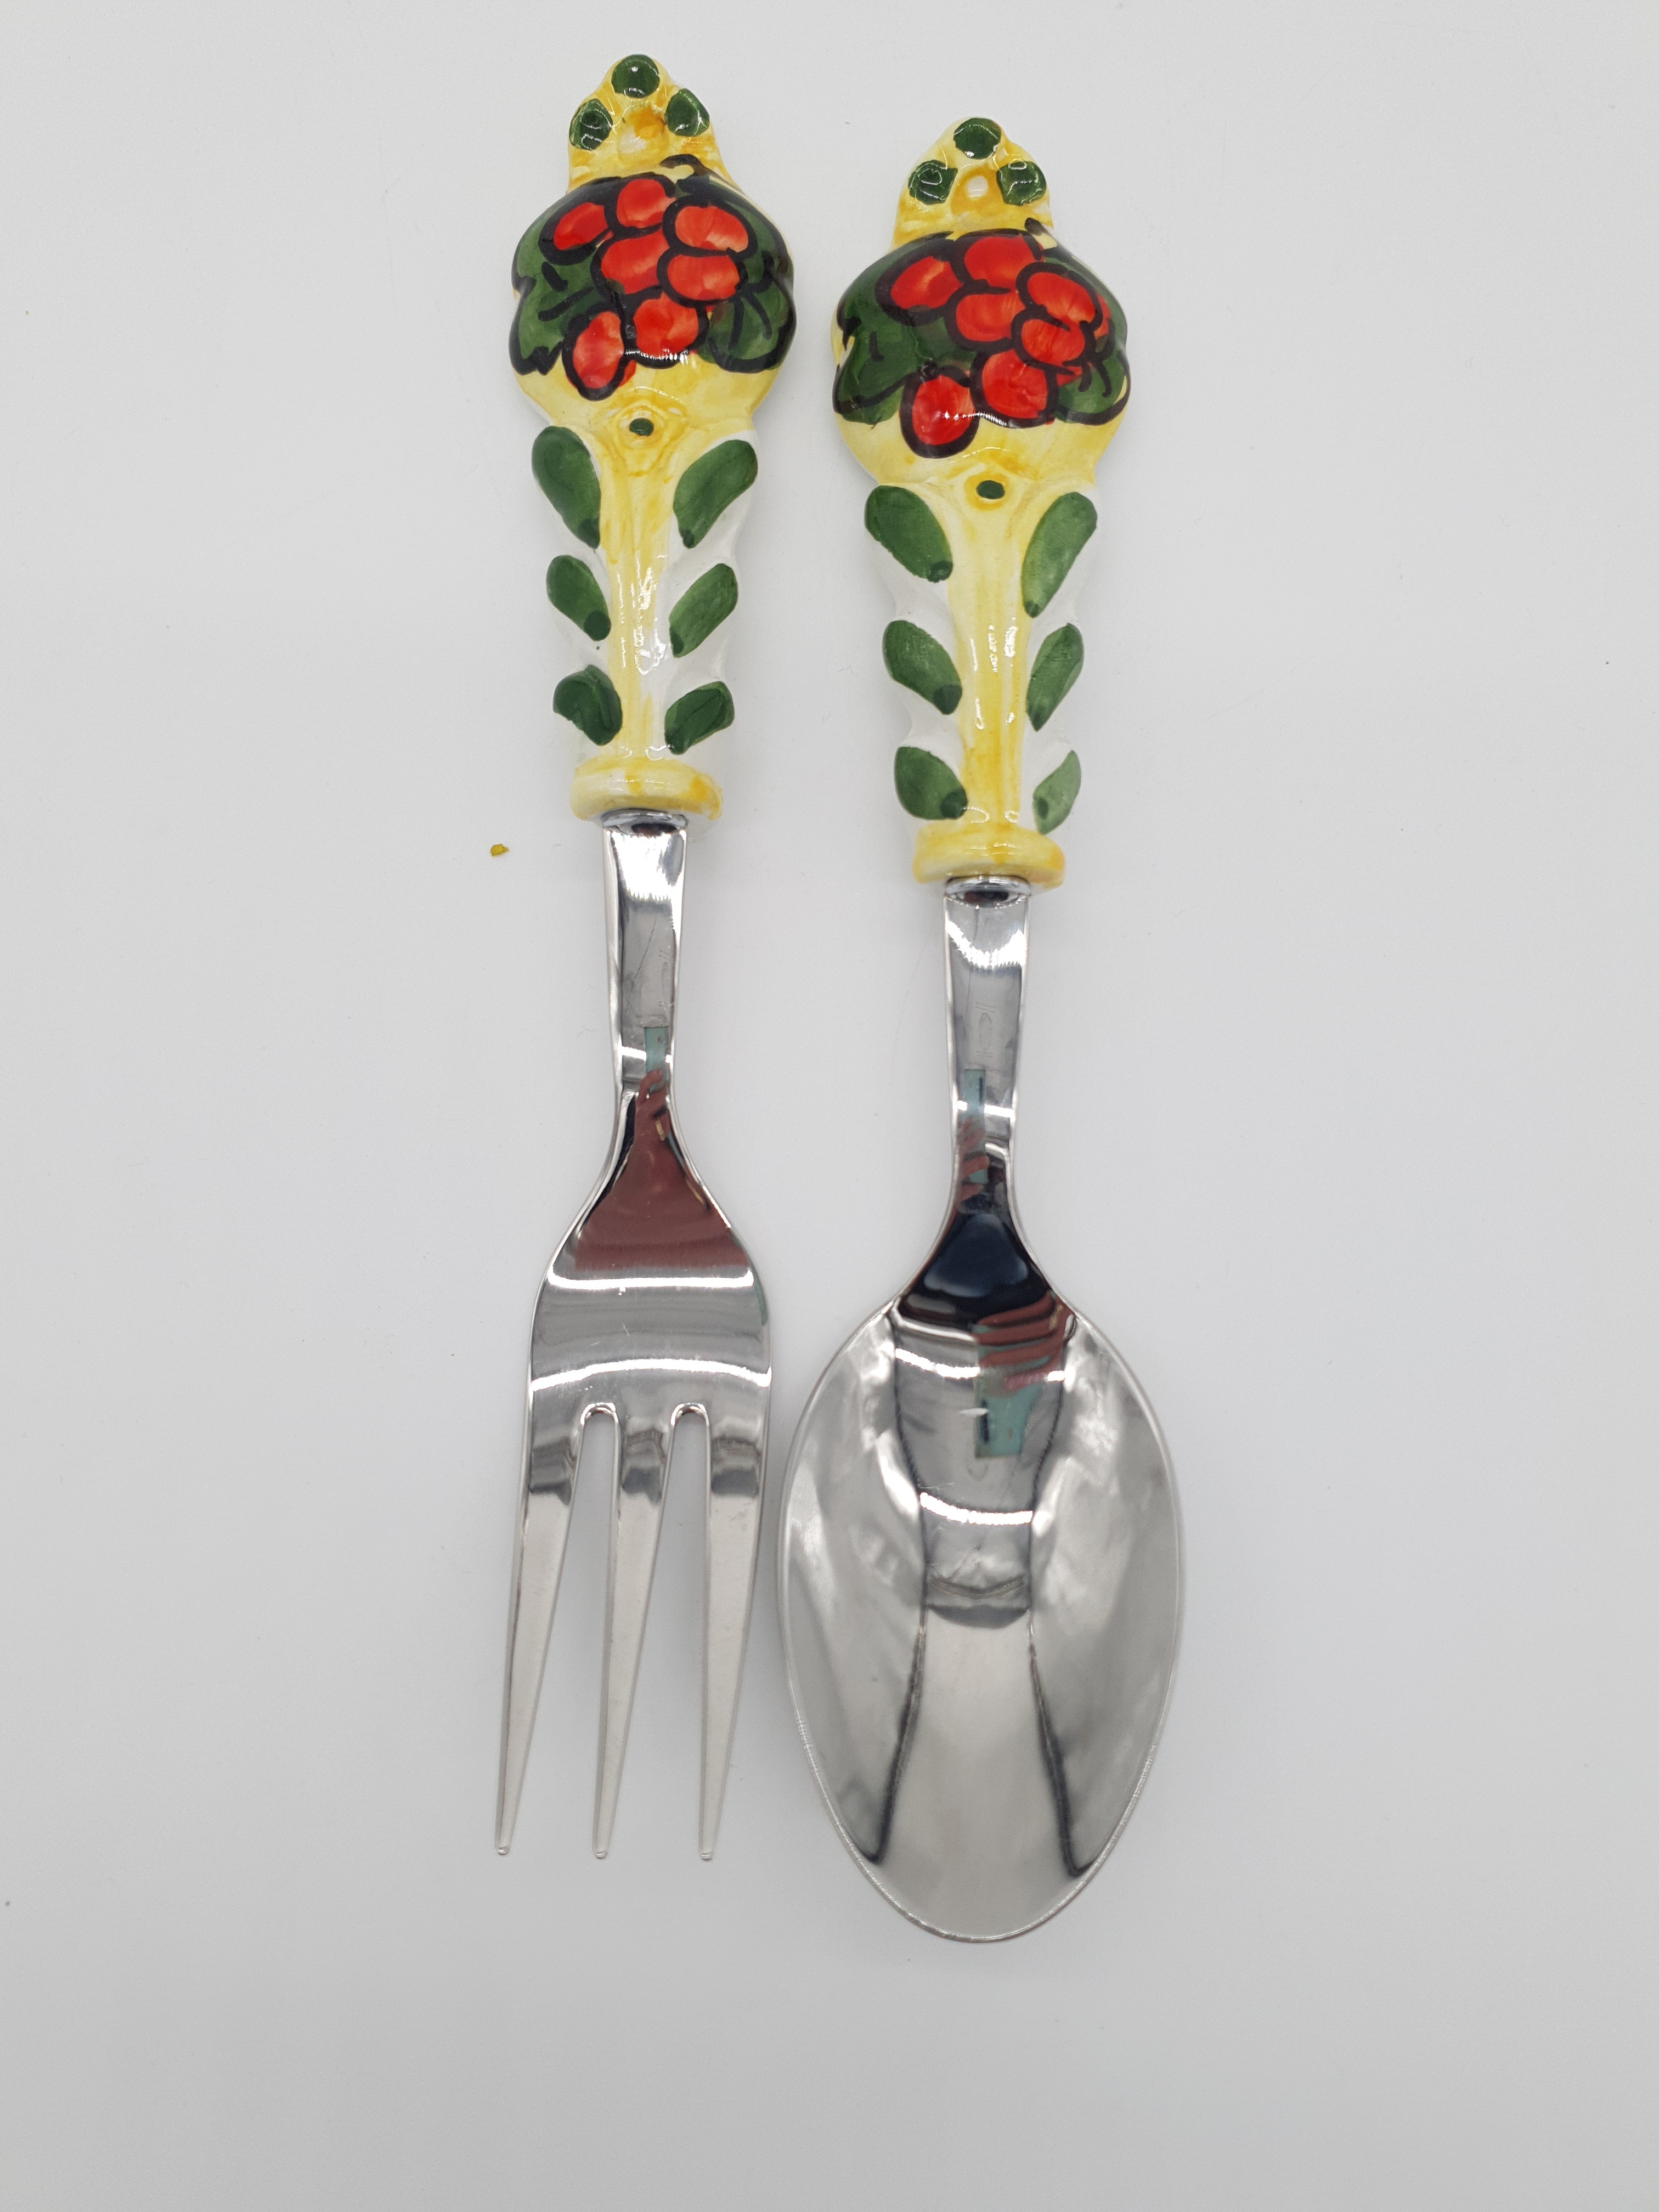 Pair of Cutlery for Serving Meat Red Grapes Yellow Background Steel and Ceramic